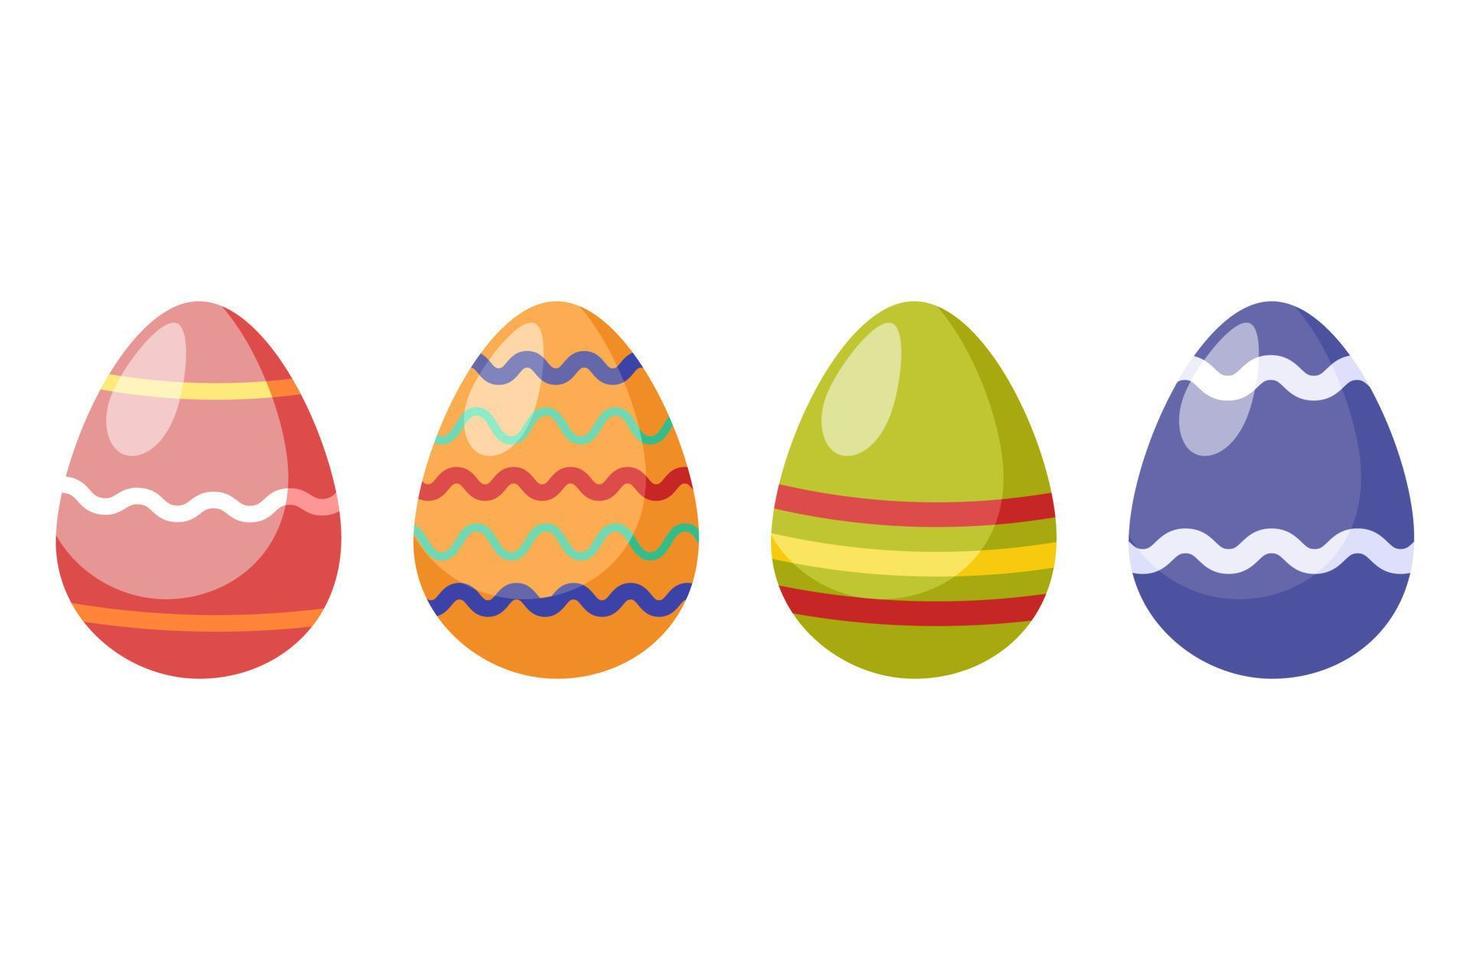 Colorful Easter eggs with glare, shadows, decorated with patterns of straight and wavy lines. Spring festival vector